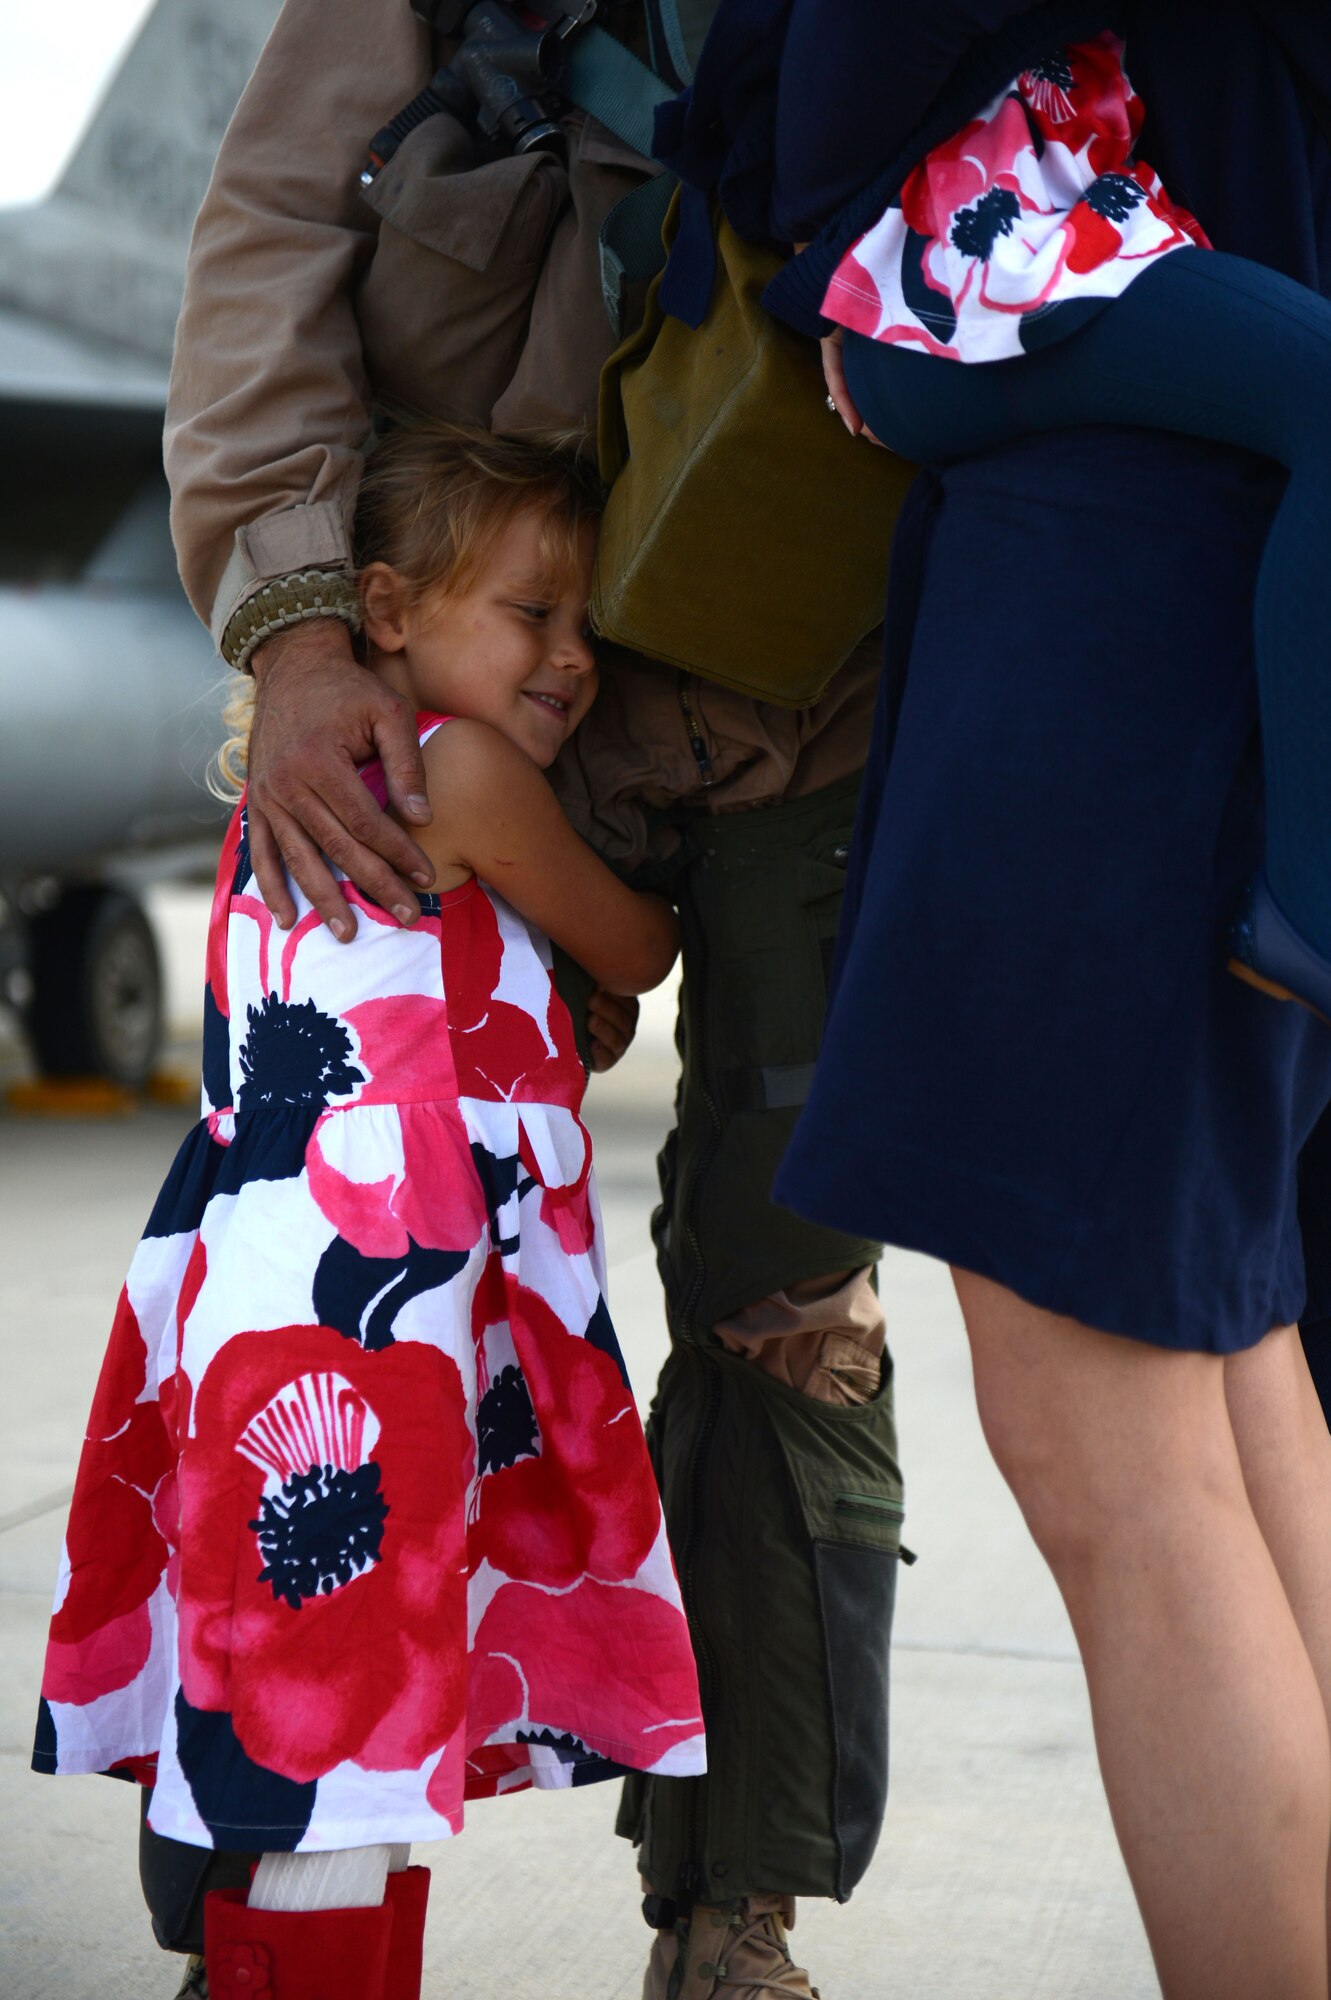 SPANGDAHLEM AIR BASE, Germany – Abigail Chalverus, daughter of U.S. Air Force Lt. Col. Marshall Chalverus, 480th Fighter Squadron leadership from Seattle, hugs her father during a deployment homecoming Sept. 15, 2013. More than 100 friends, family and Airmen showed up to support the event. (U.S. Air Force photo by Airman 1st Class Gustavo Castillo/Released)